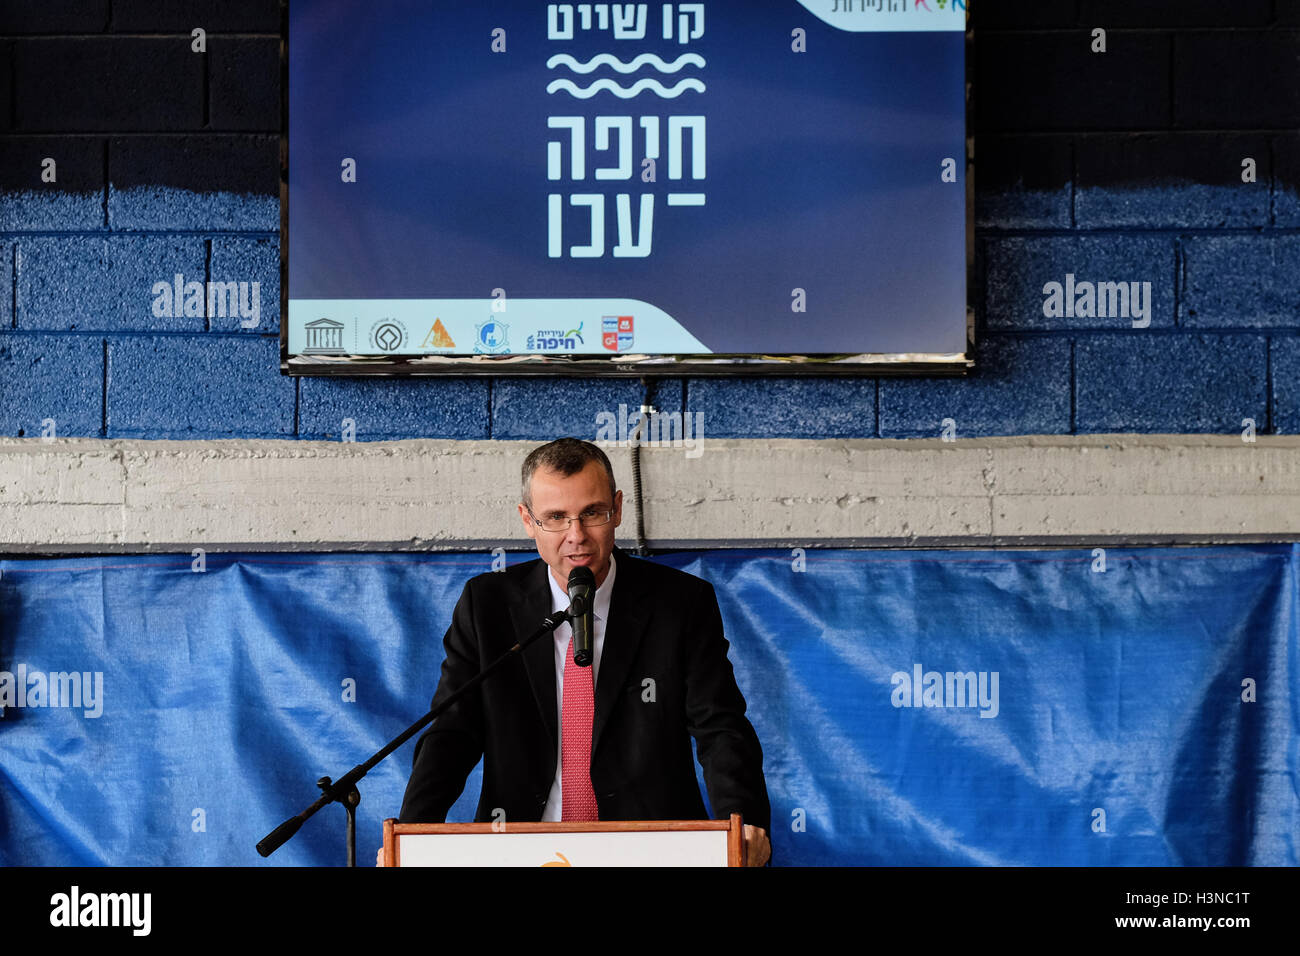 Haifa, Israel. 10th October, 2016. Israeli Tourism Minister YARIV LEVIN addresses a reception at the Port of Haifa launching the Haifa-Acre pleasure cruise line. The line, which will run on a fixed timetable with several daily cruises, is aimed at domestic and international tourism offering views of the Carmel Mountains, downtown Haifa, along the coast, the colorful and authentic fishing port in Acre and the Acre Marina. Credit:  Nir Alon/Alamy Live News Stock Photo